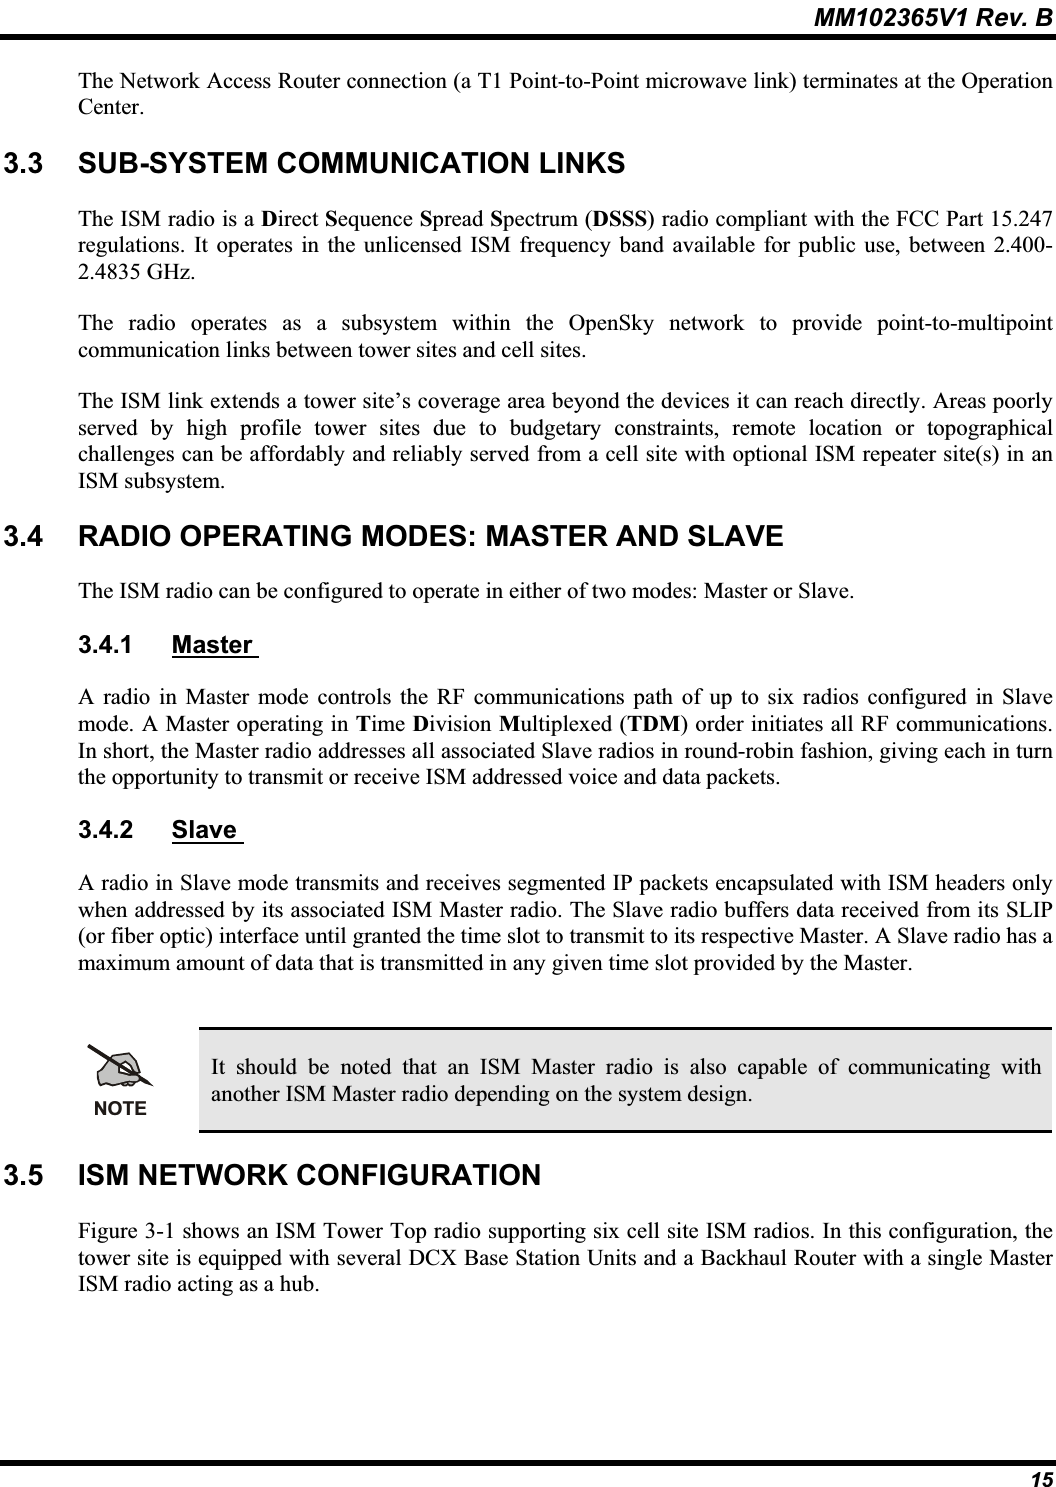 MM102365V1 Rev. B The Network Access Router connection (a T1 Point-to-Point microwave link) terminates at the Operation Center.3.3 SUB-SYSTEM COMMUNICATION LINKS The ISM radio is a Direct Sequence Spread Spectrum (DSSS) radio compliant with the FCC Part 15.247 regulations. It operates in the unlicensed ISM frequency band available for public use, between 2.400-2.4835 GHz.The radio operates as a subsystem within the OpenSky network to provide point-to-multipointcommunication links between tower sites and cell sites.The ISM link extends a tower site’s coverage area beyond the devices it can reach directly. Areas poorlyserved by high profile tower sites due to budgetary constraints, remote location or topographical challenges can be affordably and reliably served from a cell site with optional ISM repeater site(s) in an ISM subsystem.3.4 RADIO OPERATING MODES: MASTER AND SLAVE The ISM radio can be configured to operate in either of two modes: Master or Slave. 3.4.1 Master A radio in Master mode controls the RF communications path of up to six radios configured in Slave mode. A Master operating in Time Division Multiplexed (TDM) order initiates all RF communications.In short, the Master radio addresses all associated Slave radios in round-robin fashion, giving each in turnthe opportunity to transmit or receive ISM addressed voice and data packets. 3.4.2 Slave A radio in Slave mode transmits and receives segmented IP packets encapsulated with ISM headers onlywhen addressed by its associated ISM Master radio. The Slave radio buffers data received from its SLIP (or fiber optic) interface until granted the time slot to transmit to its respective Master. A Slave radio has a maximum amount of data that is transmitted in any given time slot provided by the Master. NOTEIt should be noted that an ISM Master radio is also capable of communicating with another ISM Master radio depending on the system design.3.5 ISM NETWORK CONFIGURATION Figure 3-1 shows an ISM Tower Top radio supporting six cell site ISM radios. In this configuration, the tower site is equipped with several DCX Base Station Units and a Backhaul Router with a single Master ISM radio acting as a hub. 15